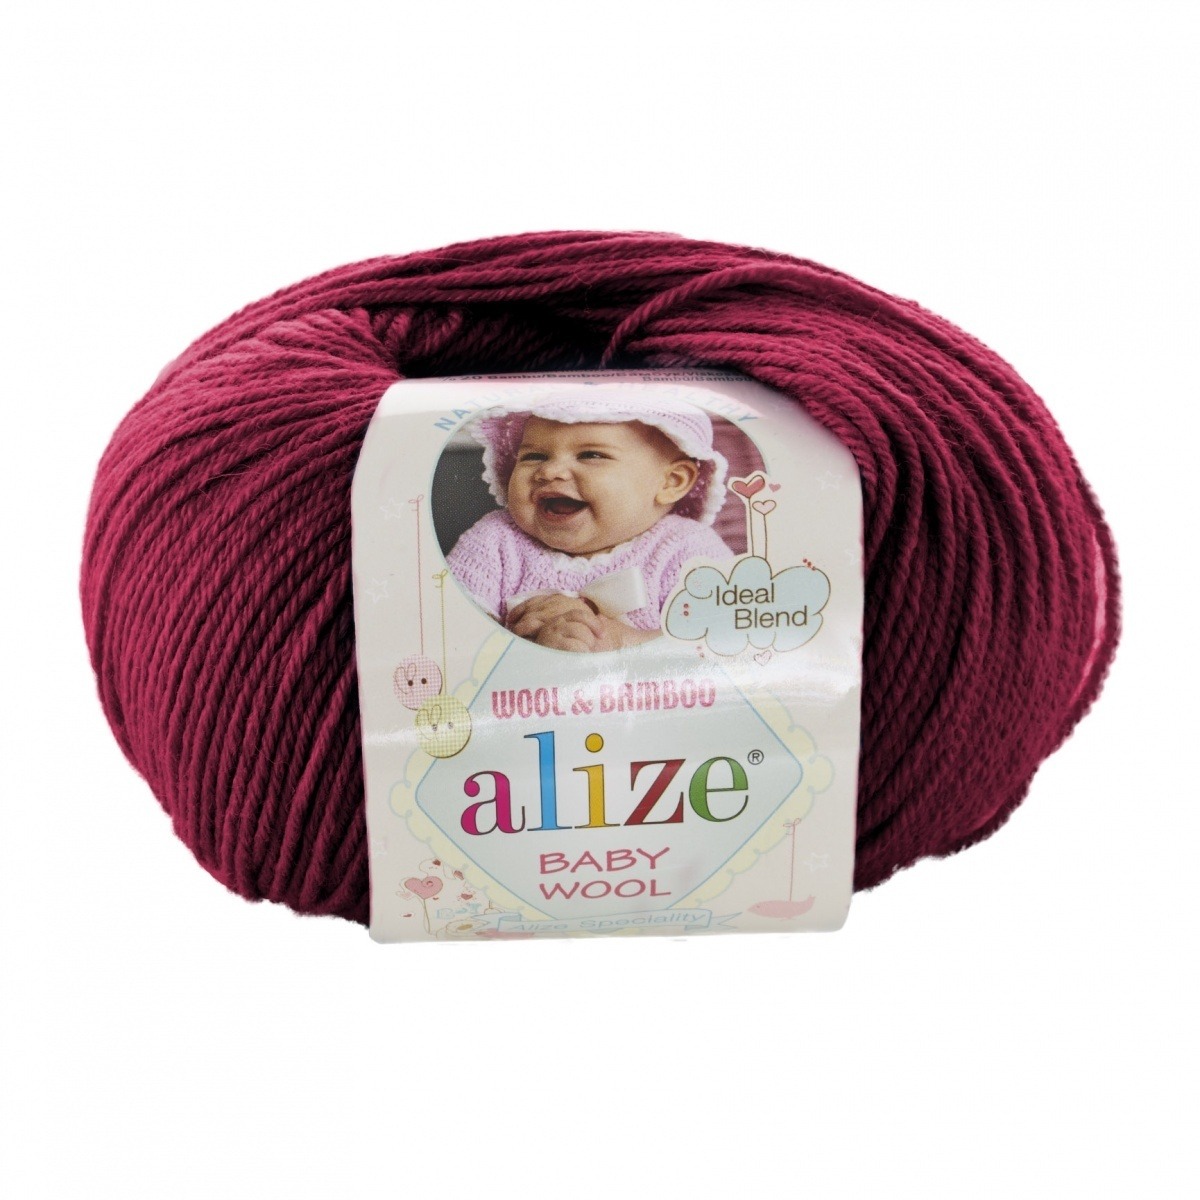 Alize "Baby wool" (390)